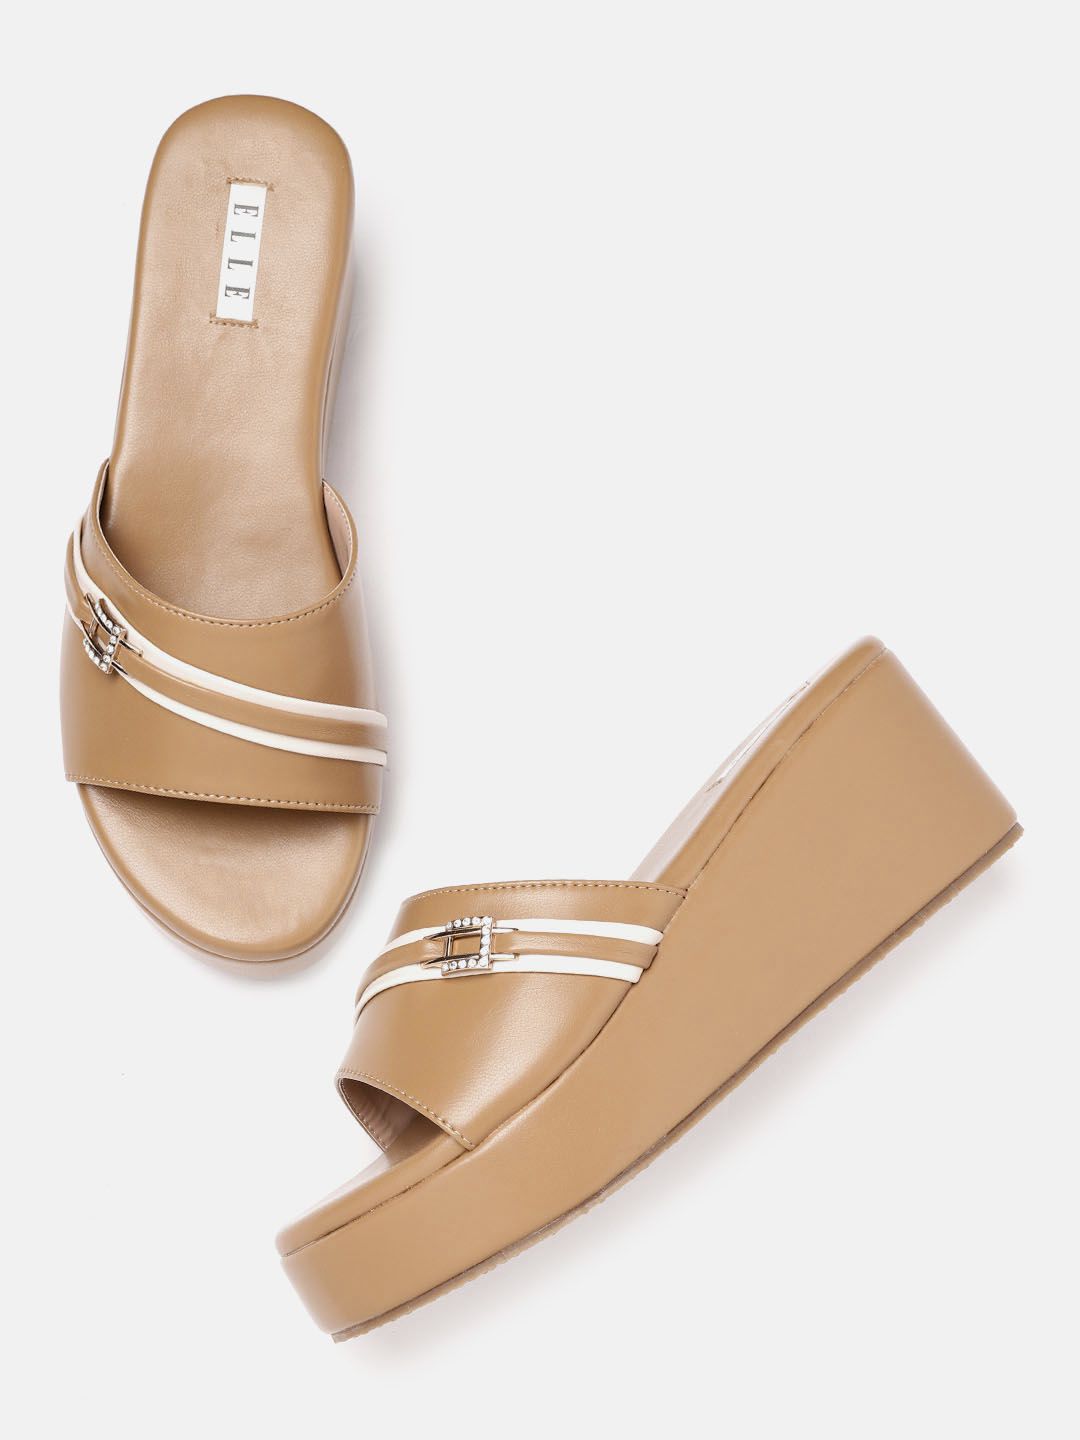 ELLE Beige & Off White Striped Wedges with Buckles Price in India